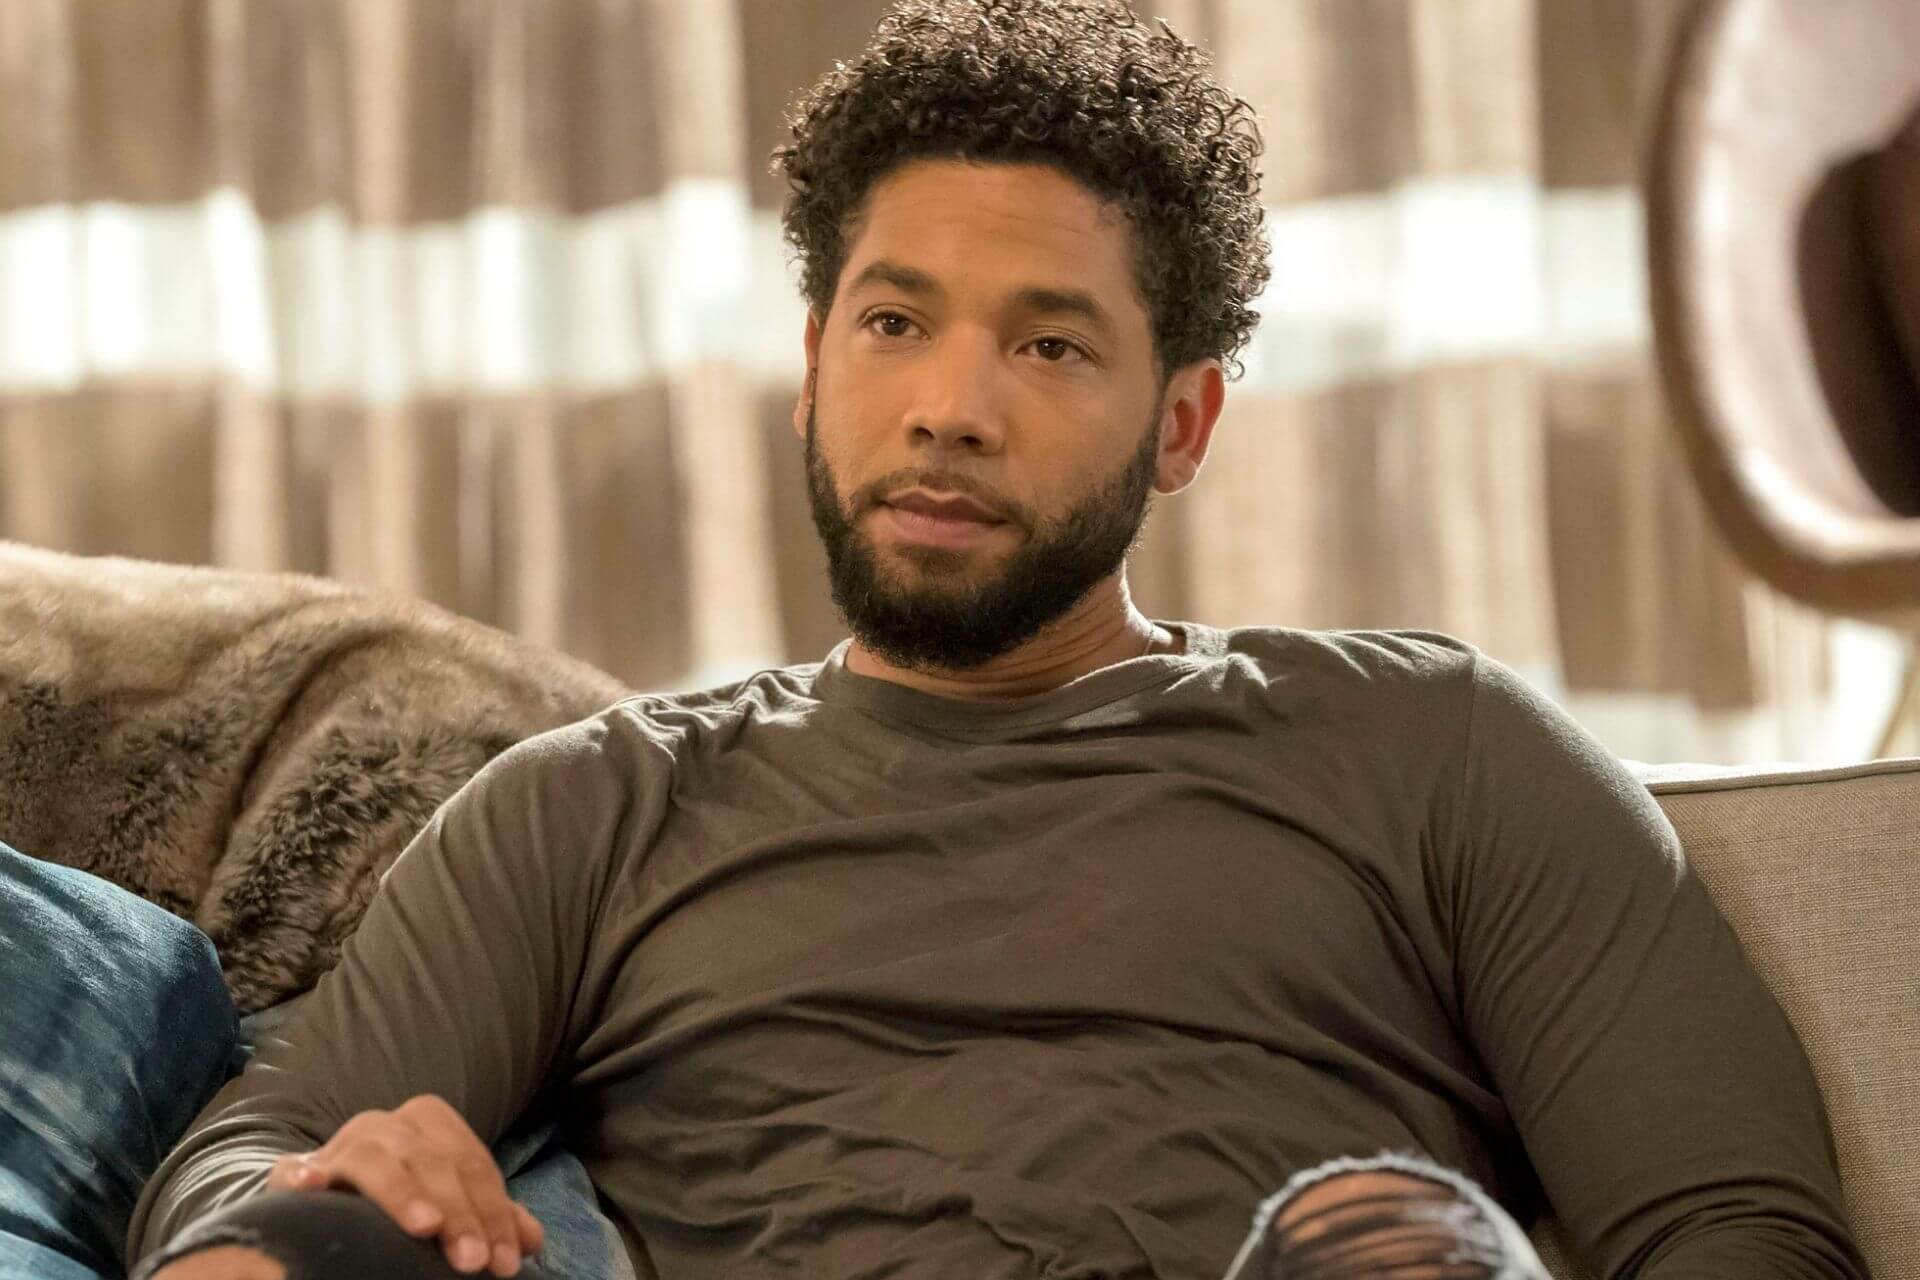 Jussie Smollett is speaking about his alleged 2019 homophobic attack for the first time